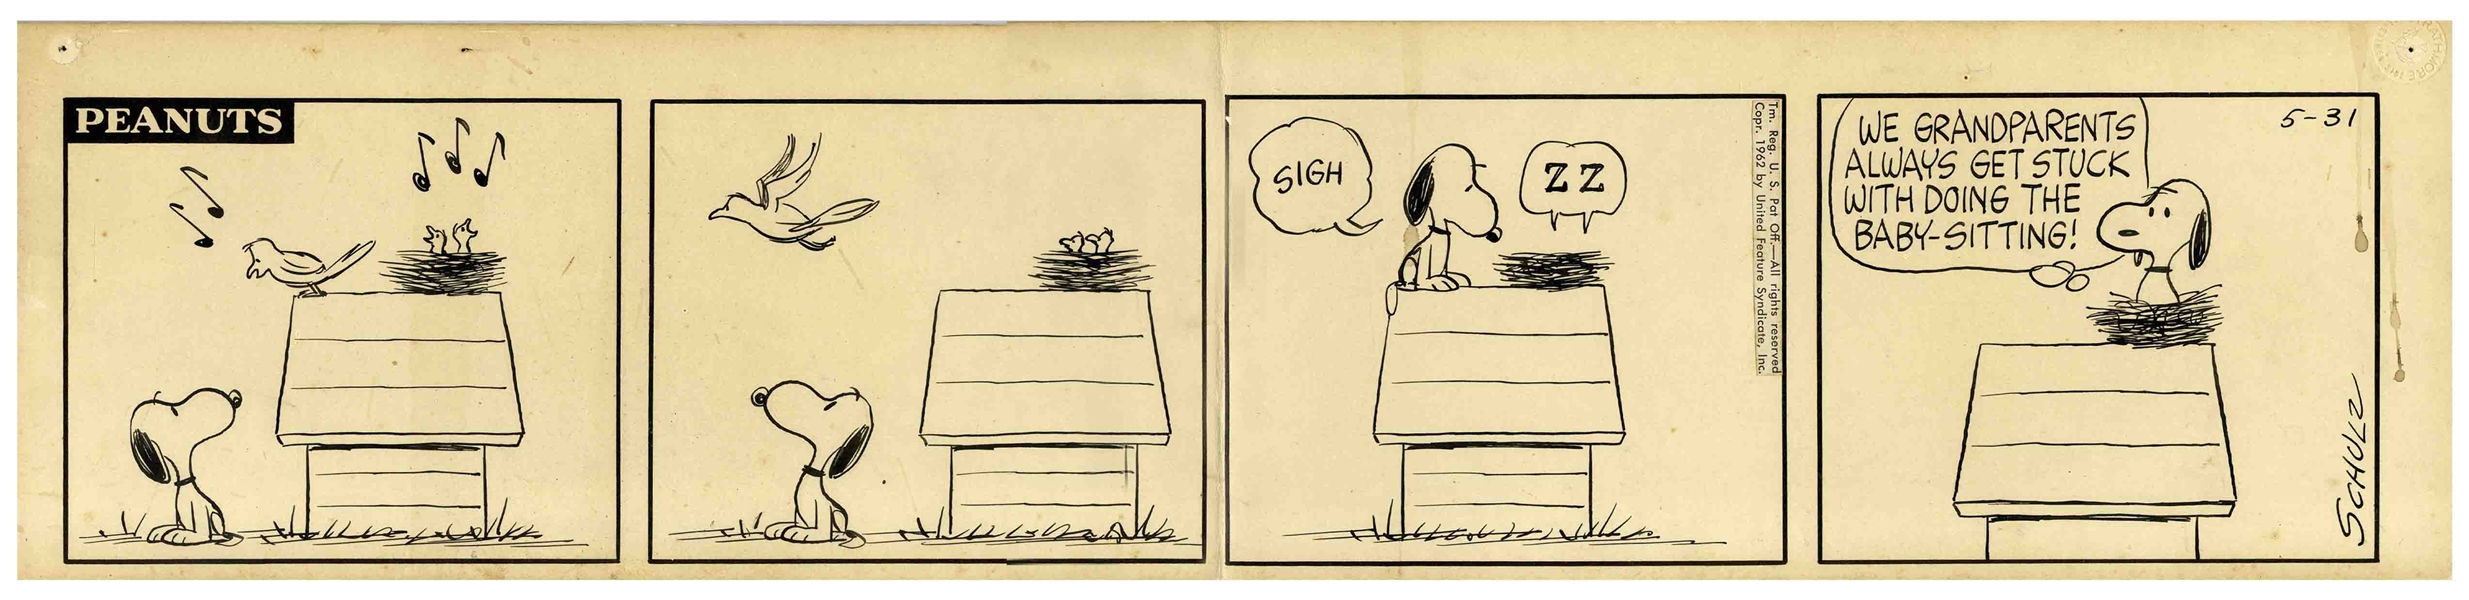 Charles Schulz Hand-Drawn ''Peanuts'' Comic Strip From 1962 -- Charming Snoopy Strip Pays Homage to Grandparents Everywhere